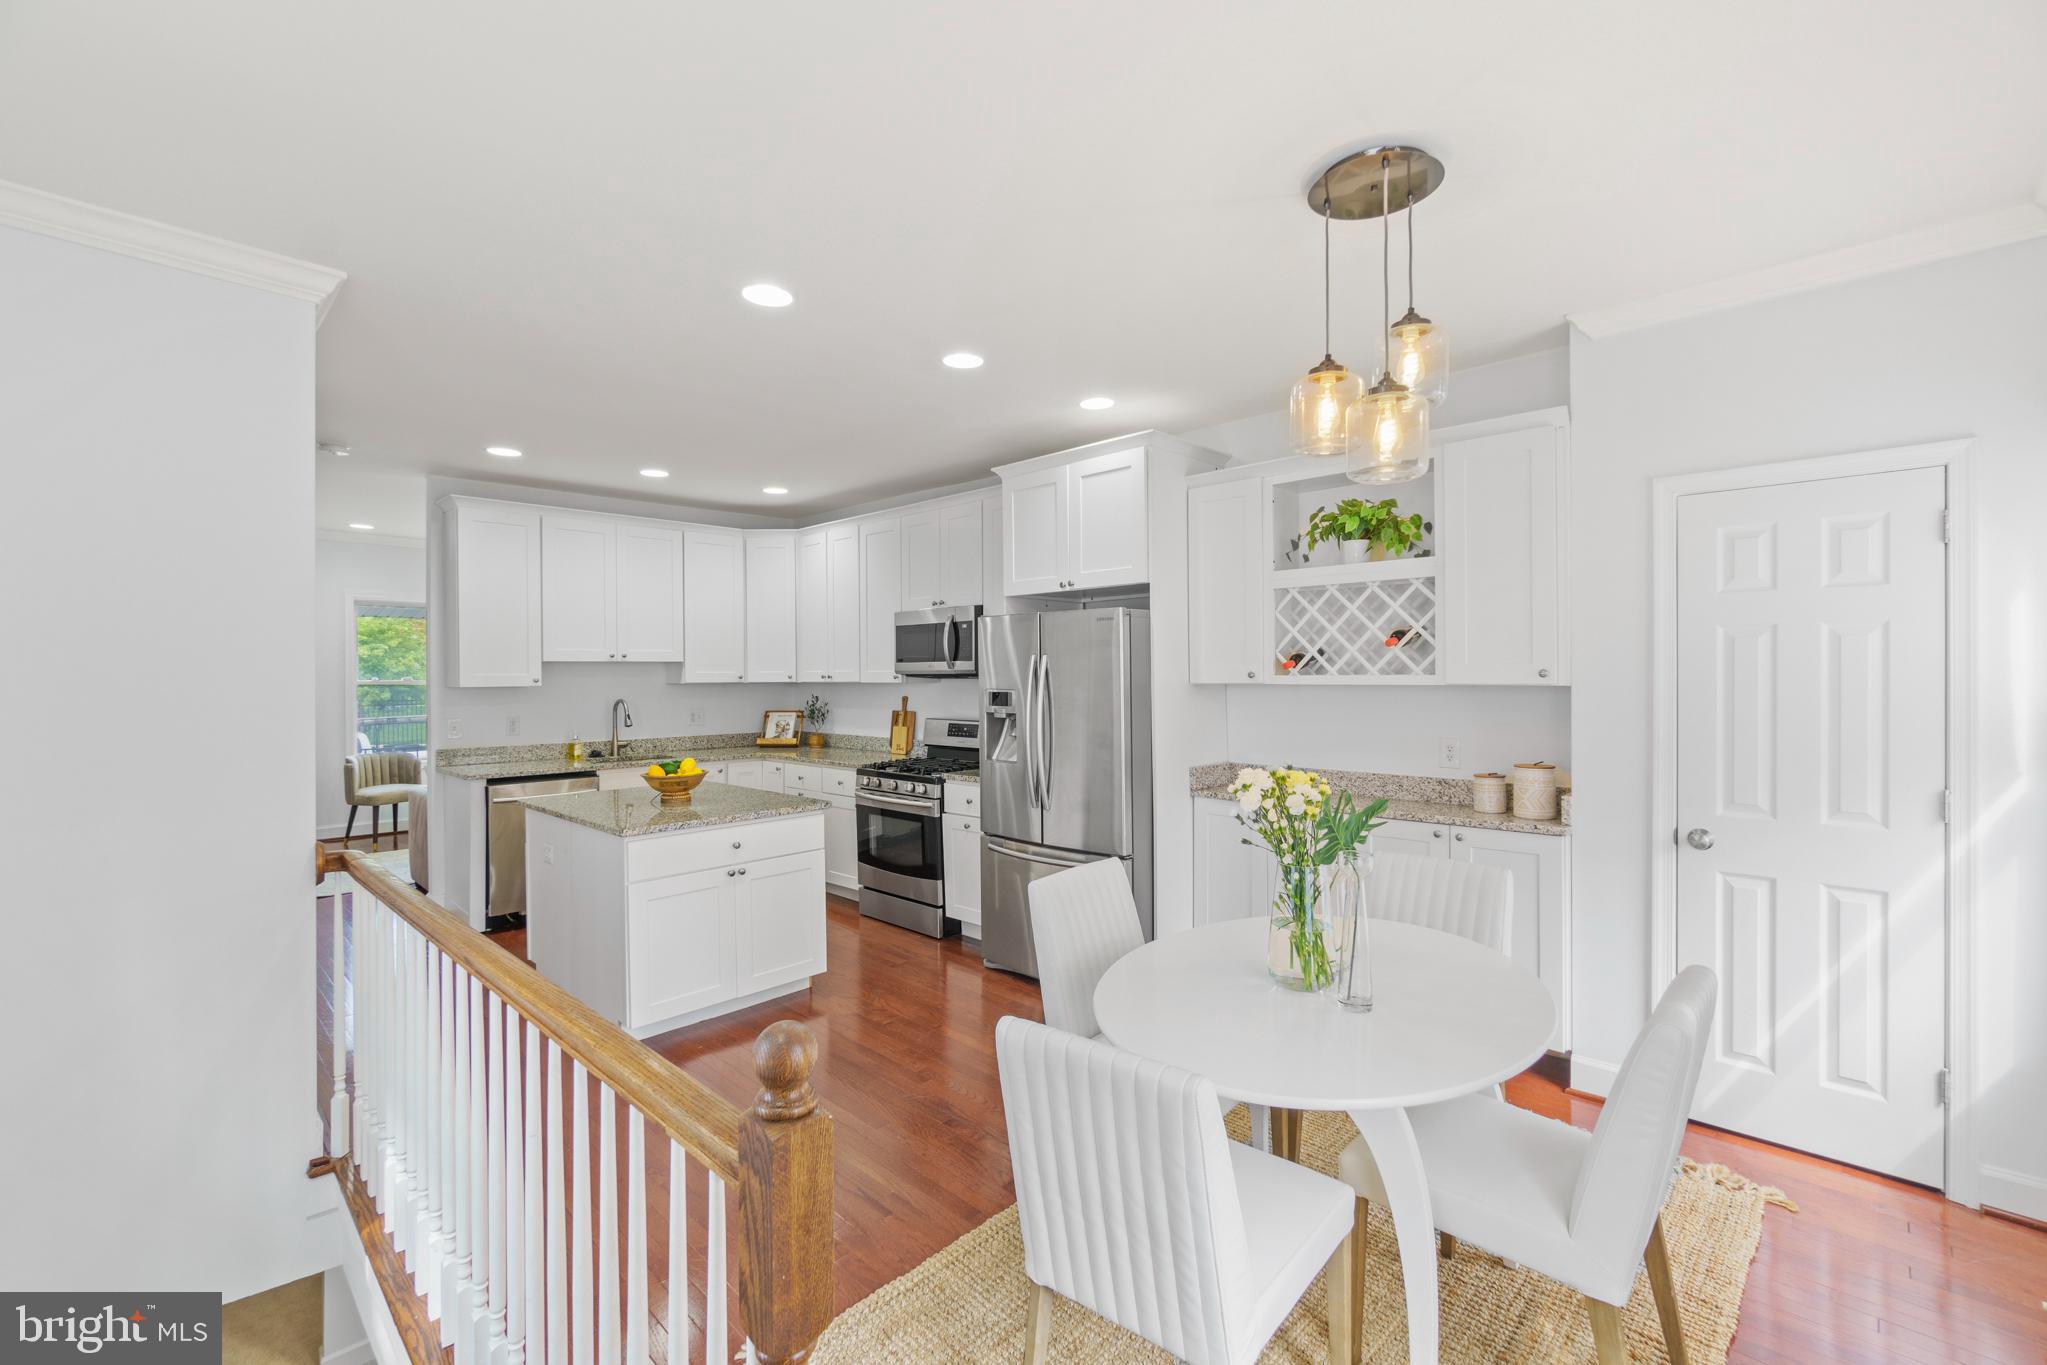 a kitchen with stainless steel appliances kitchen island granite countertop a refrigerator a stove top oven a dining table and chairs with wooden floor